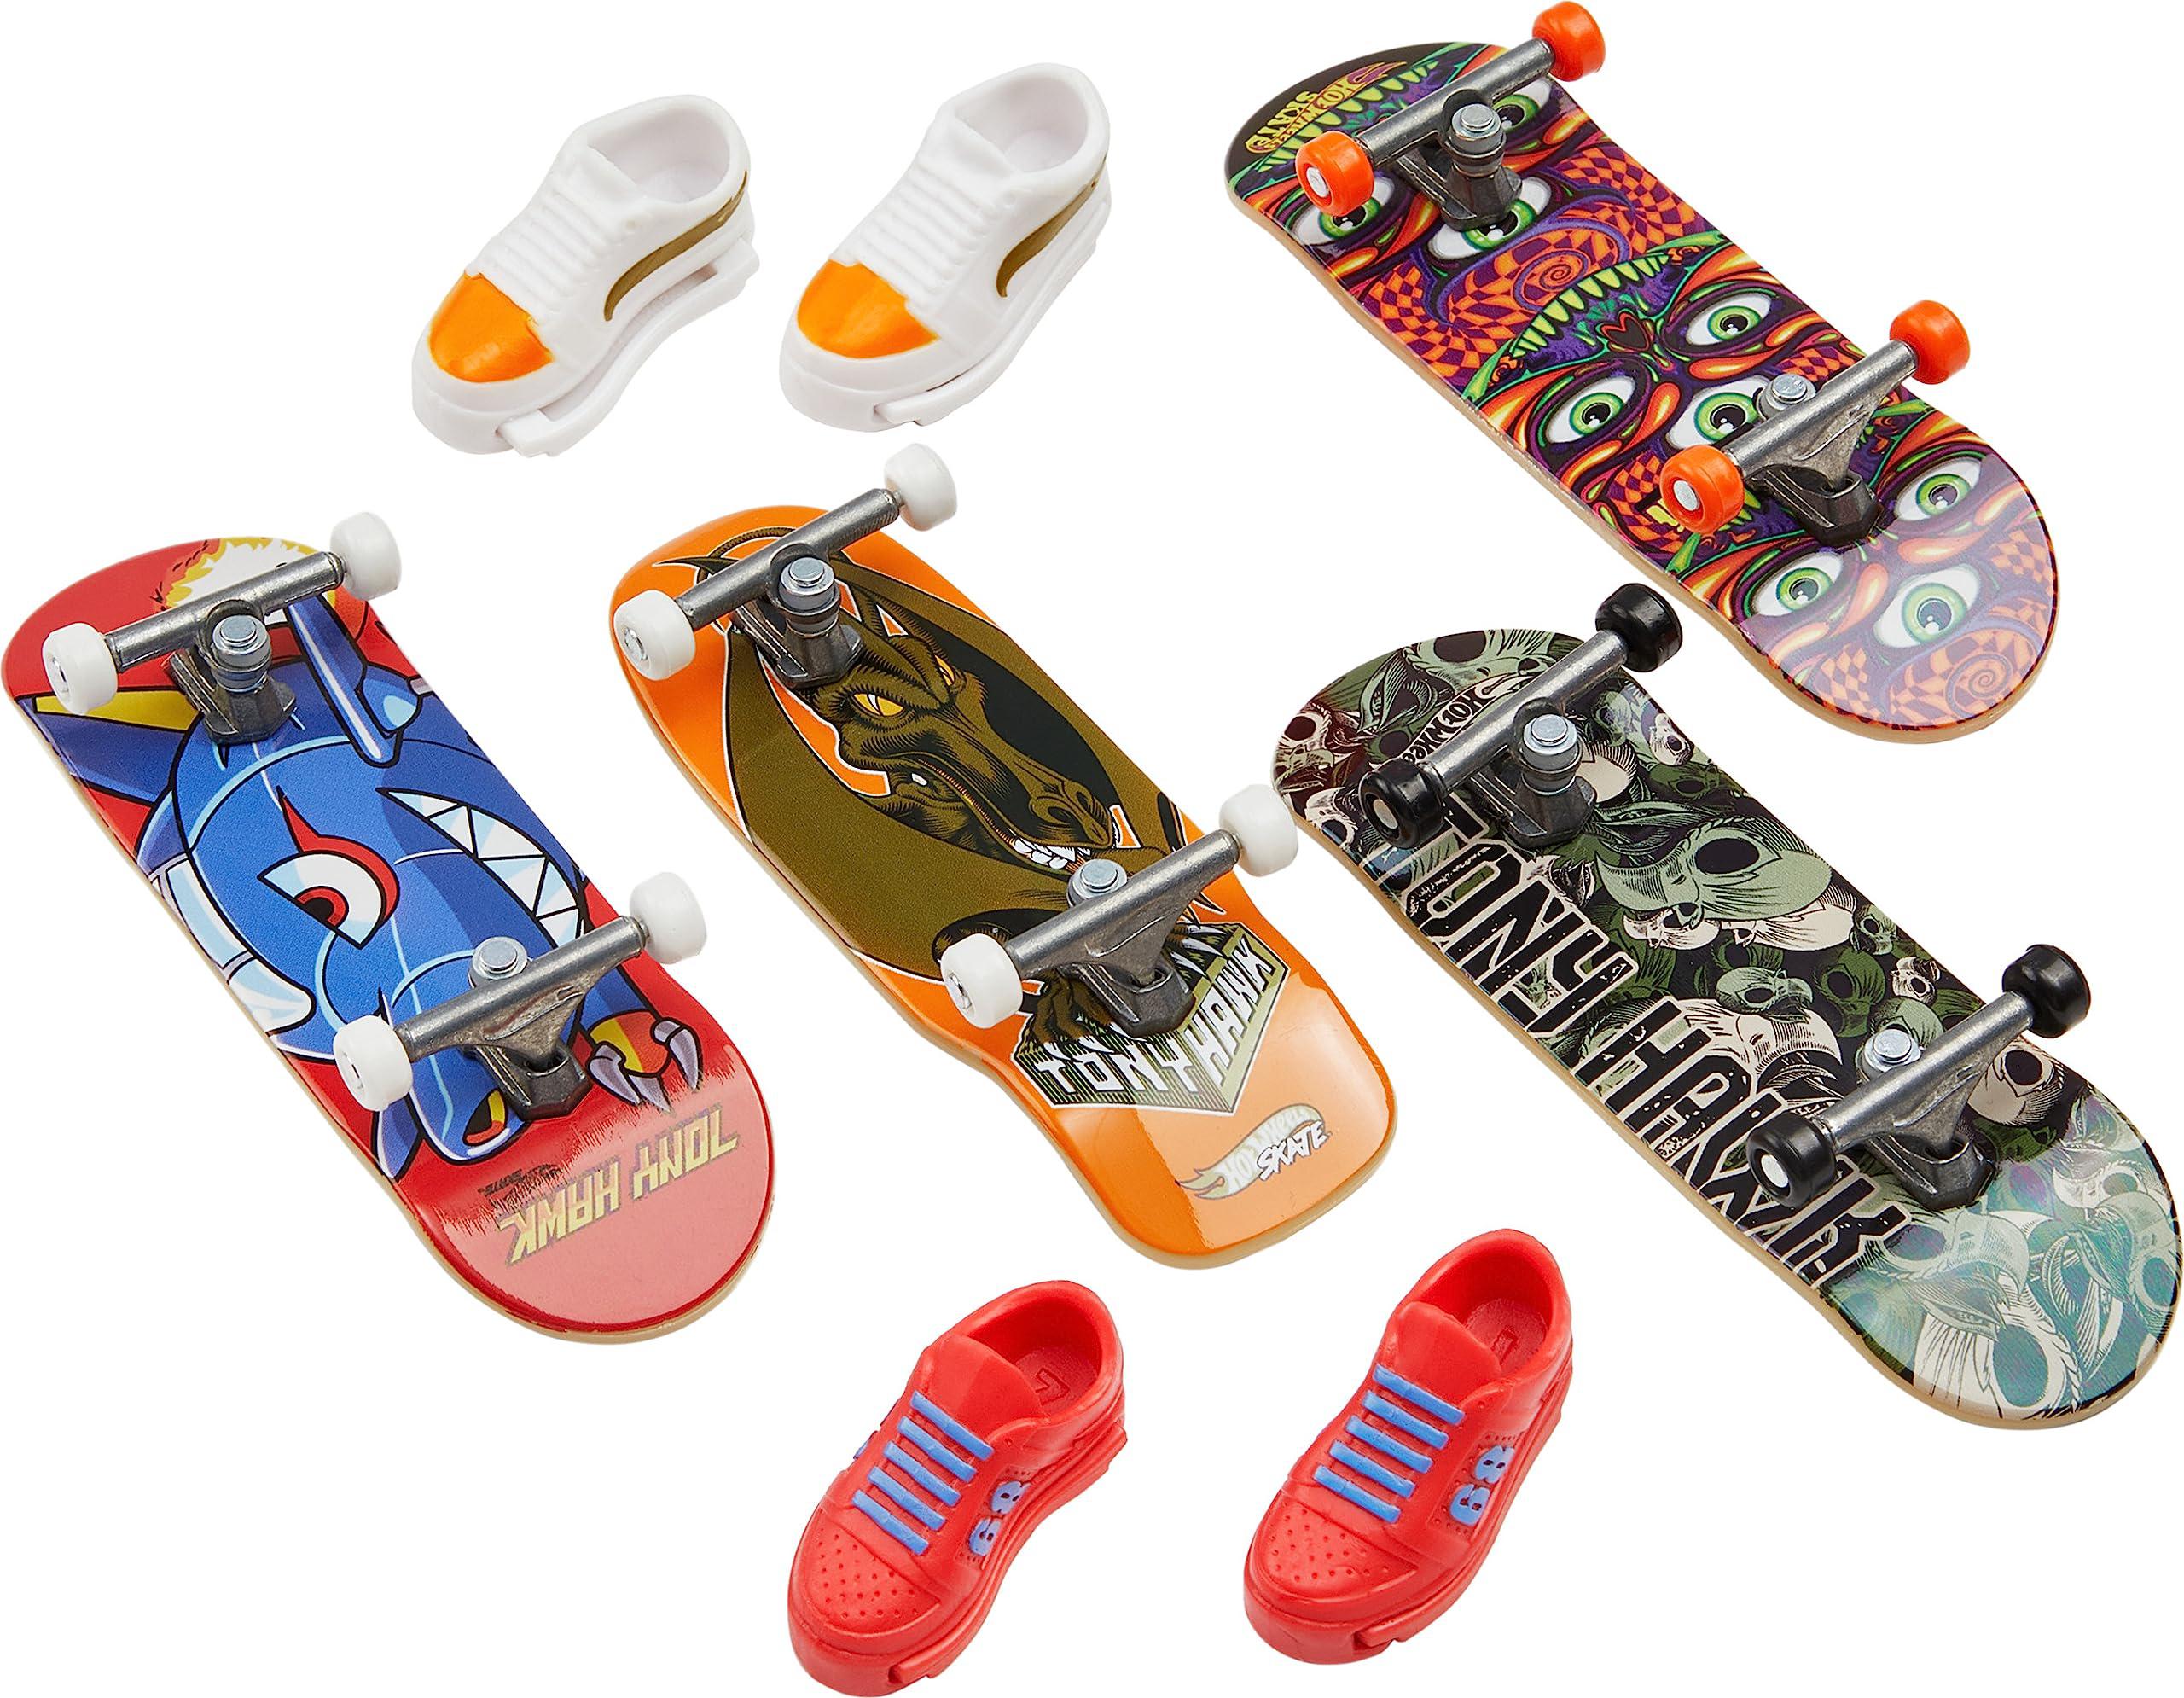 hot wheels skate tricked out pack, 4 tony hawk-themed fingerboards & 2 pairs of skate shoes, includes 1 exclusive set (styles